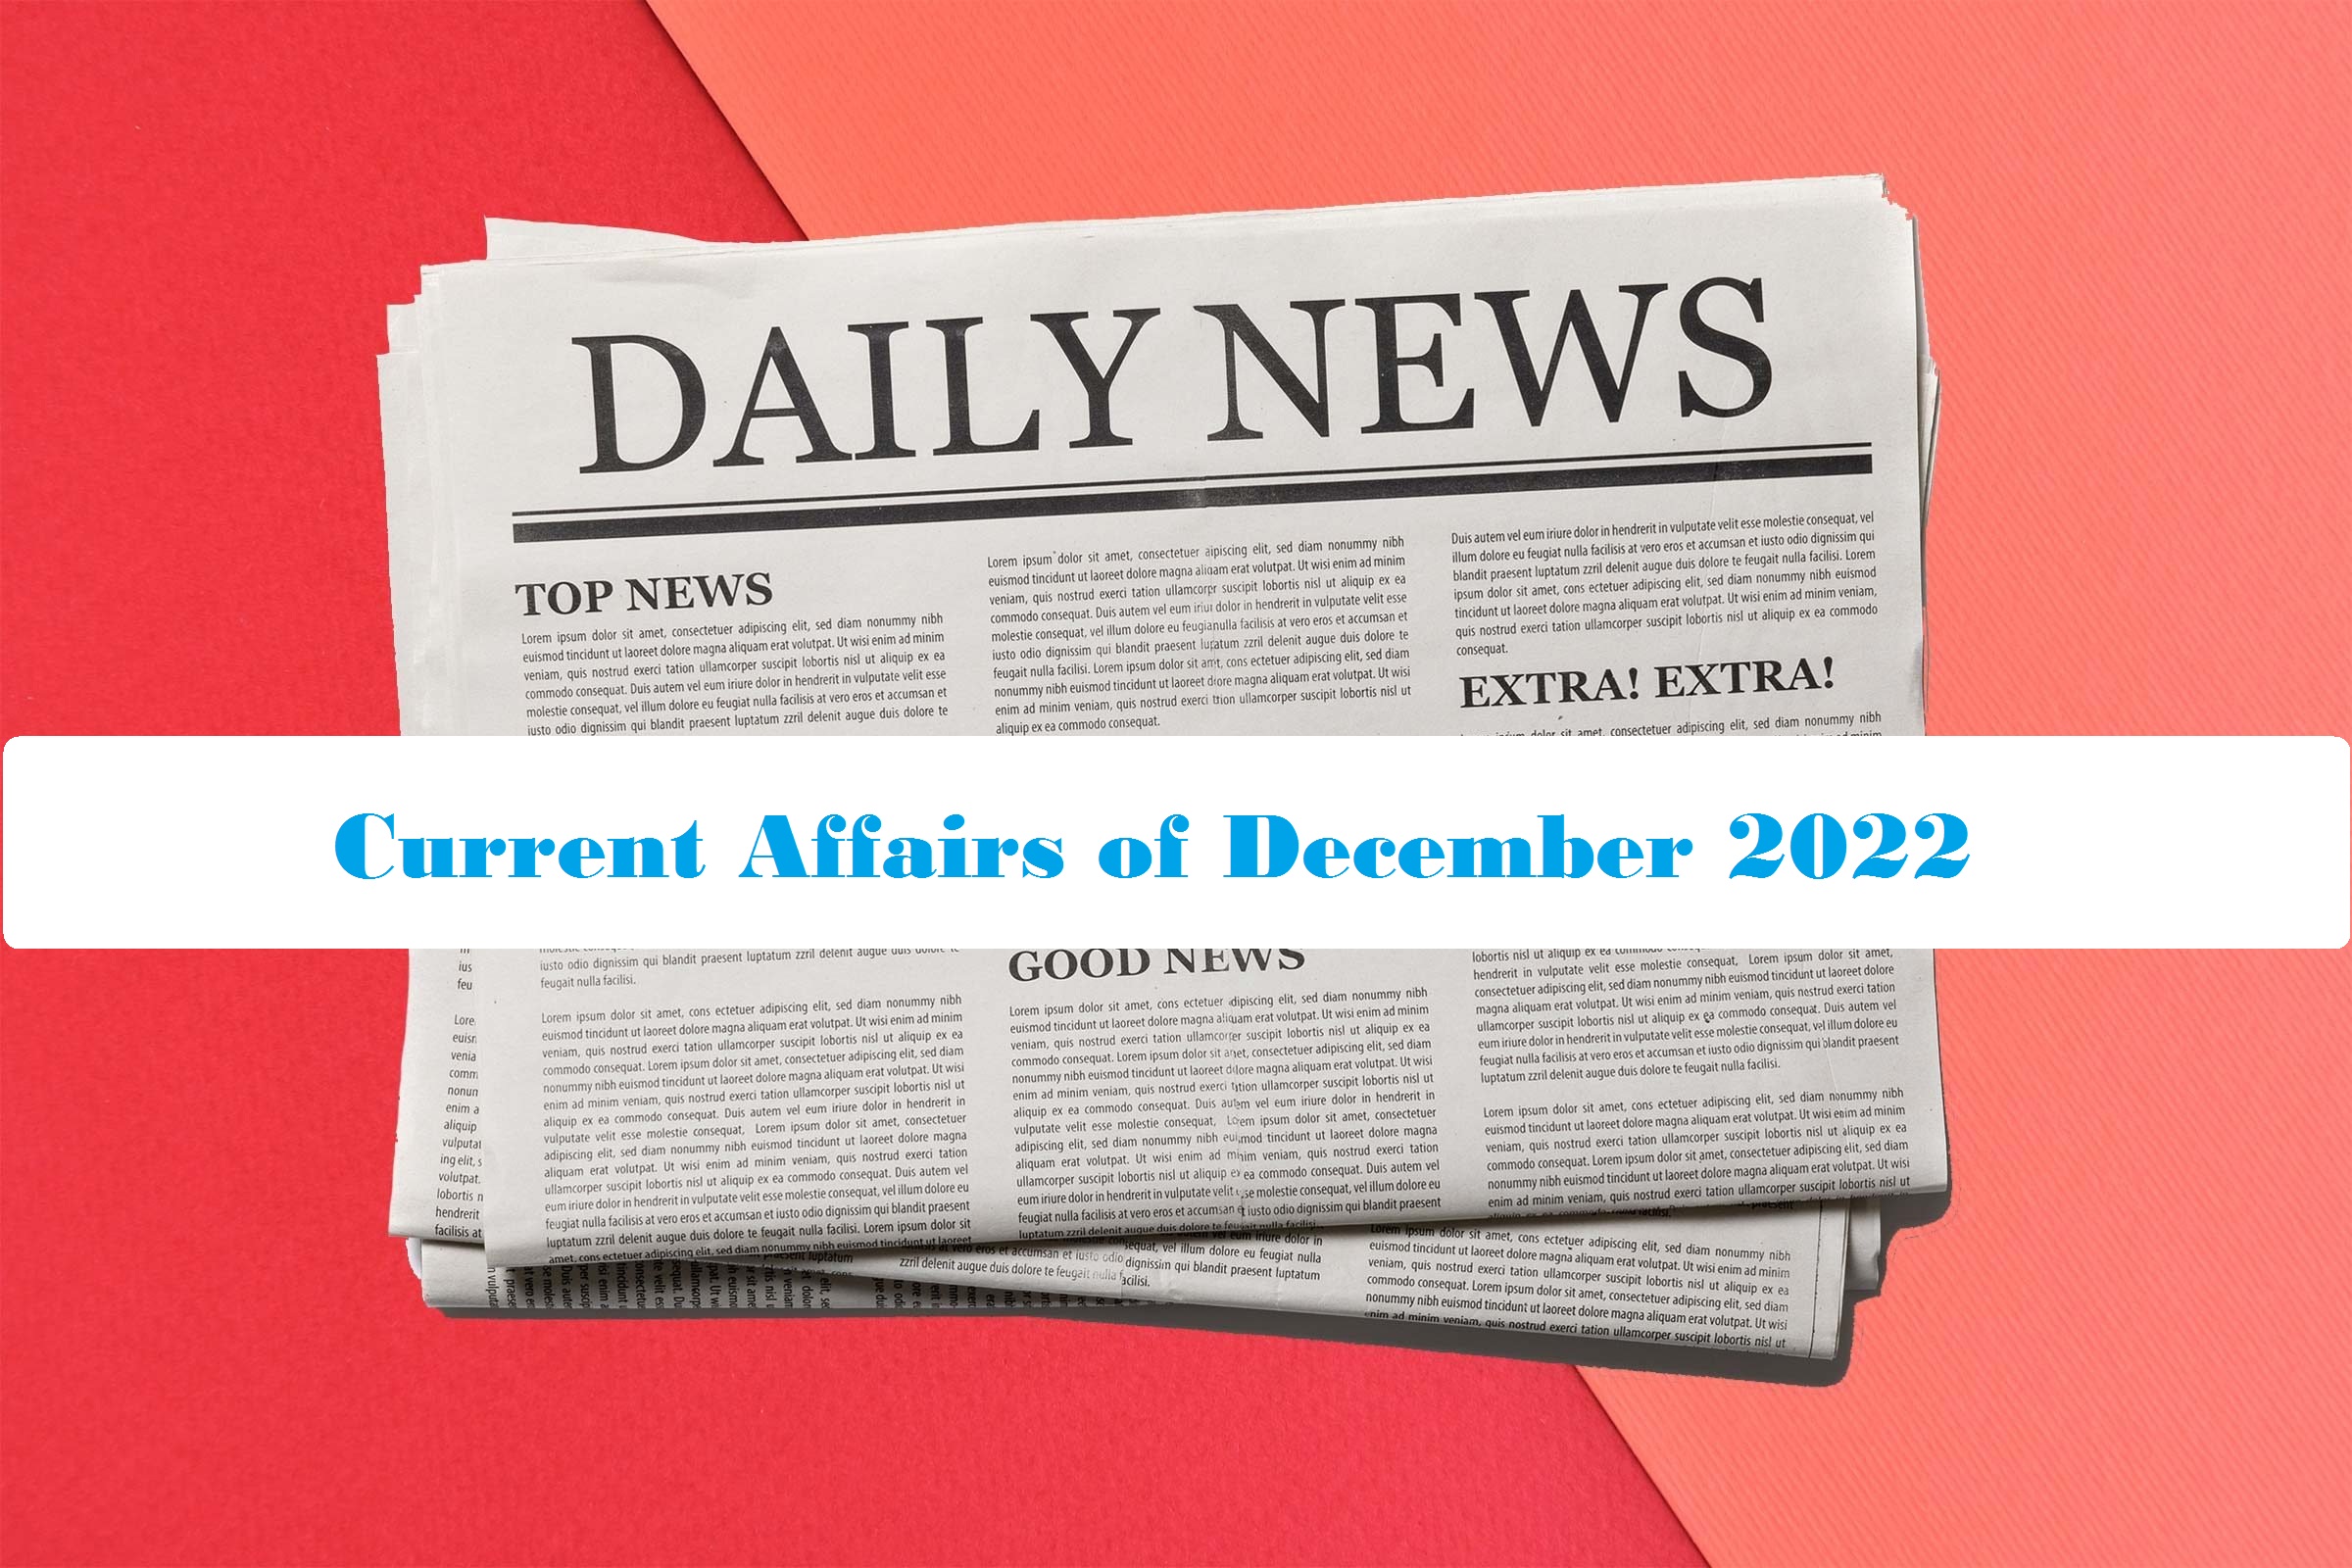 Current Affairs of December 2022